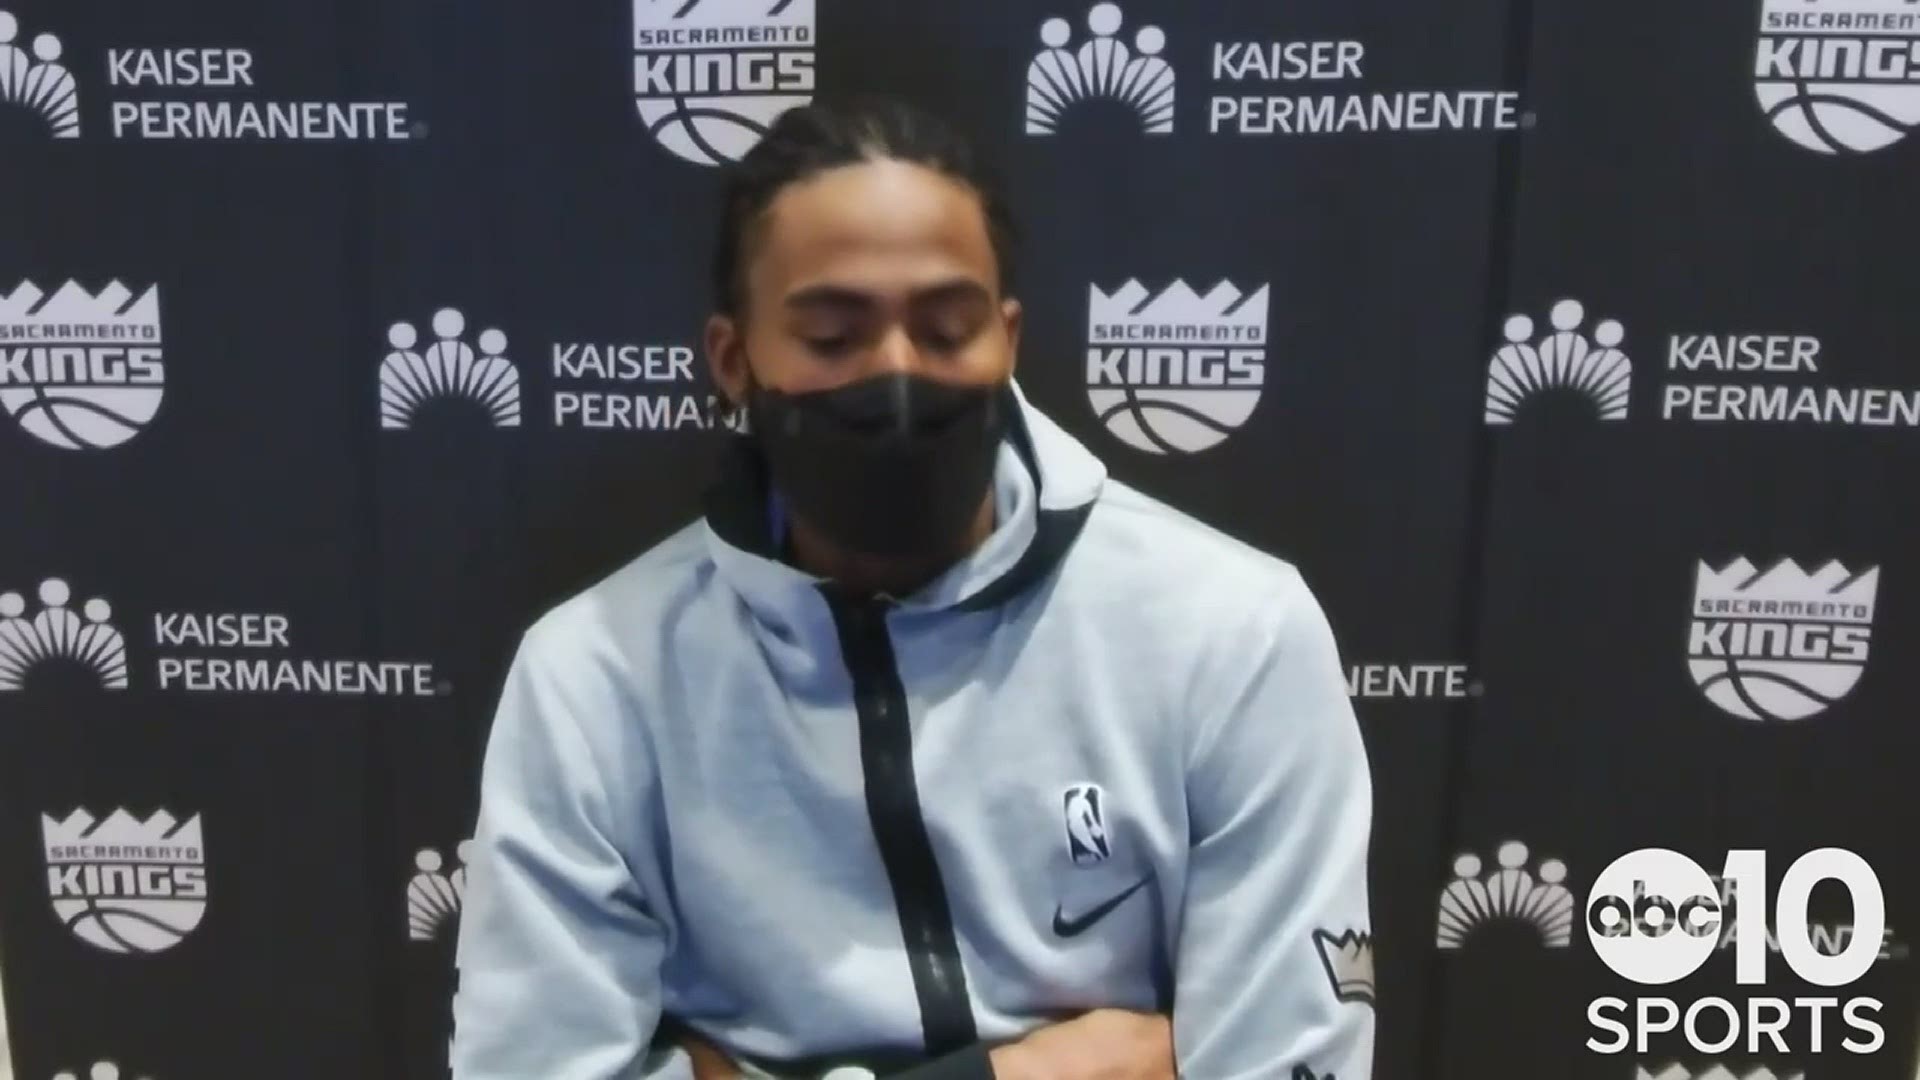 Kings F Moe Harkless gives his thoughts on the differences he's seeing in the Kings during a six game losing streak compared to when he arrived during a win streak.